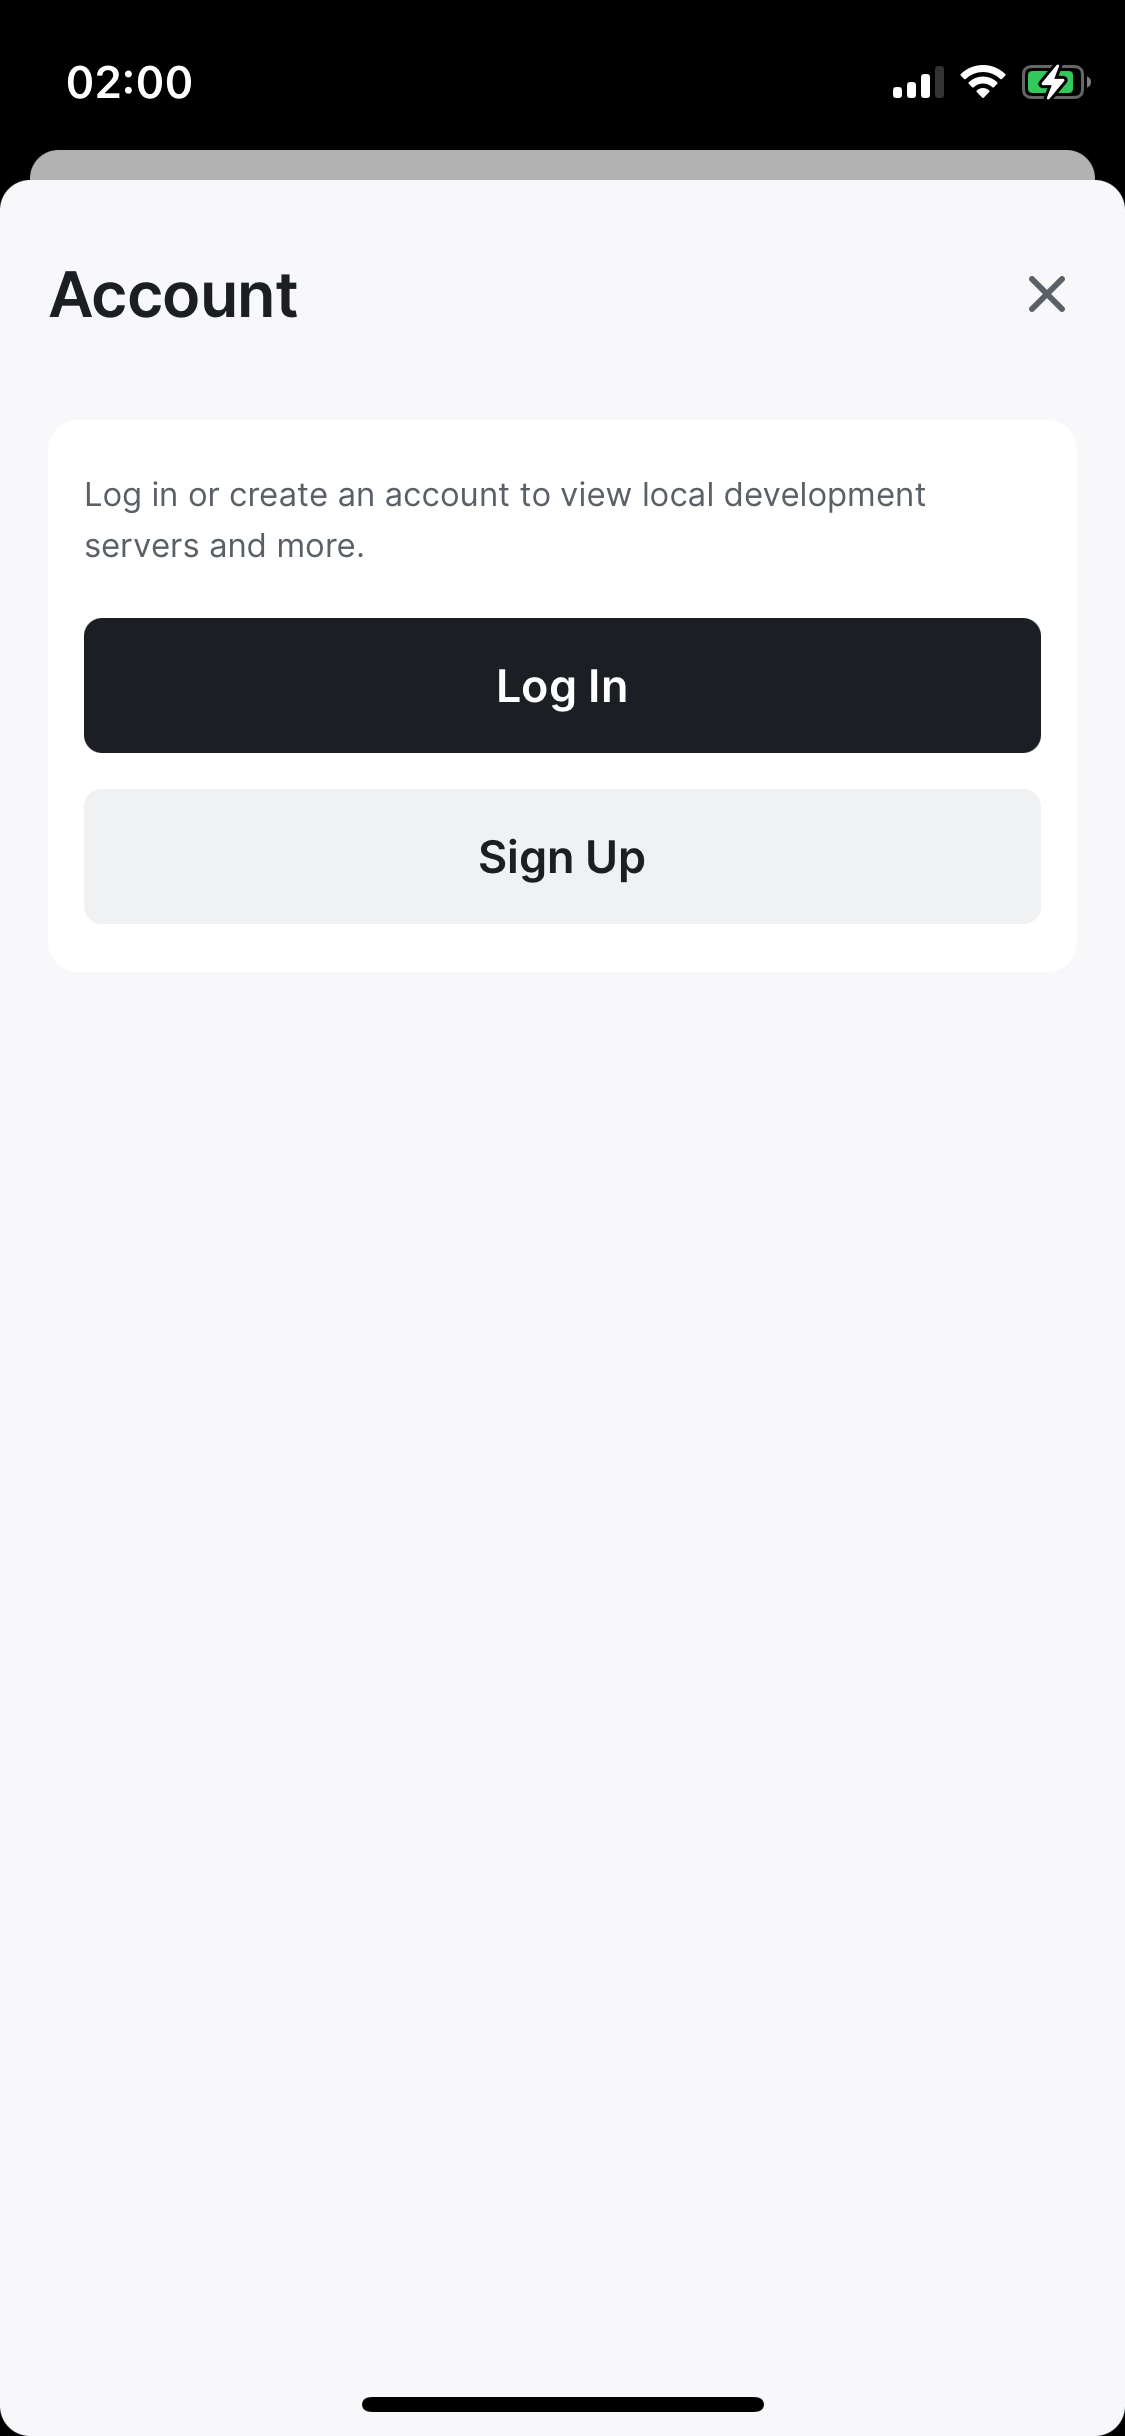 Modal to login to Expo account on iOS device